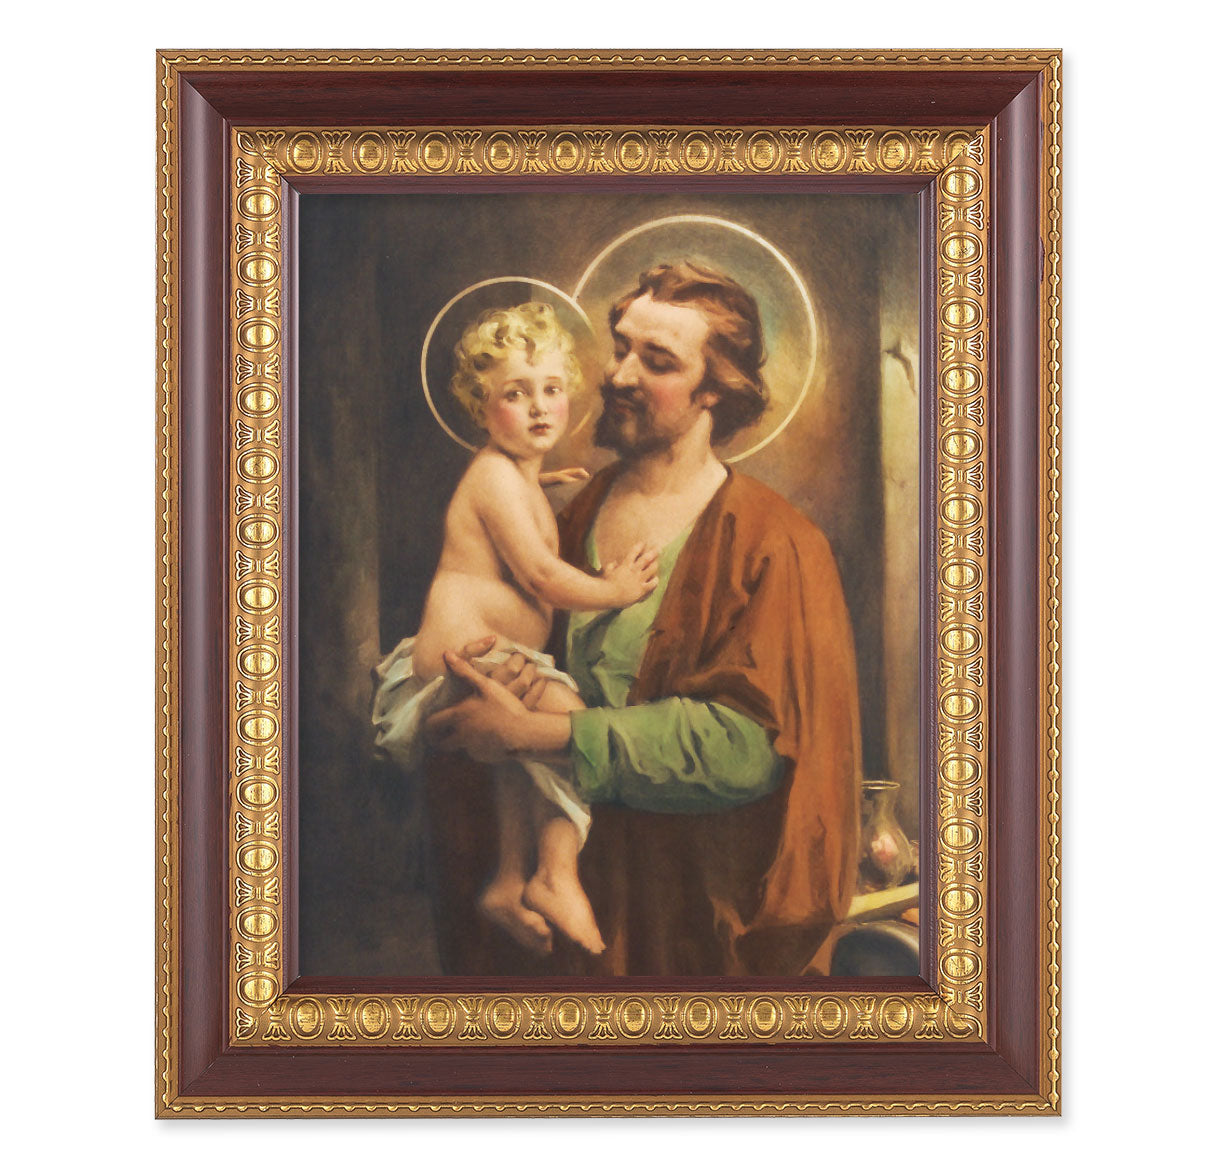 St. Joseph with Jesus Picture Framed Wall Art Decor Large, Dark Cherry with Gold Egg and Dart Detailed Frame